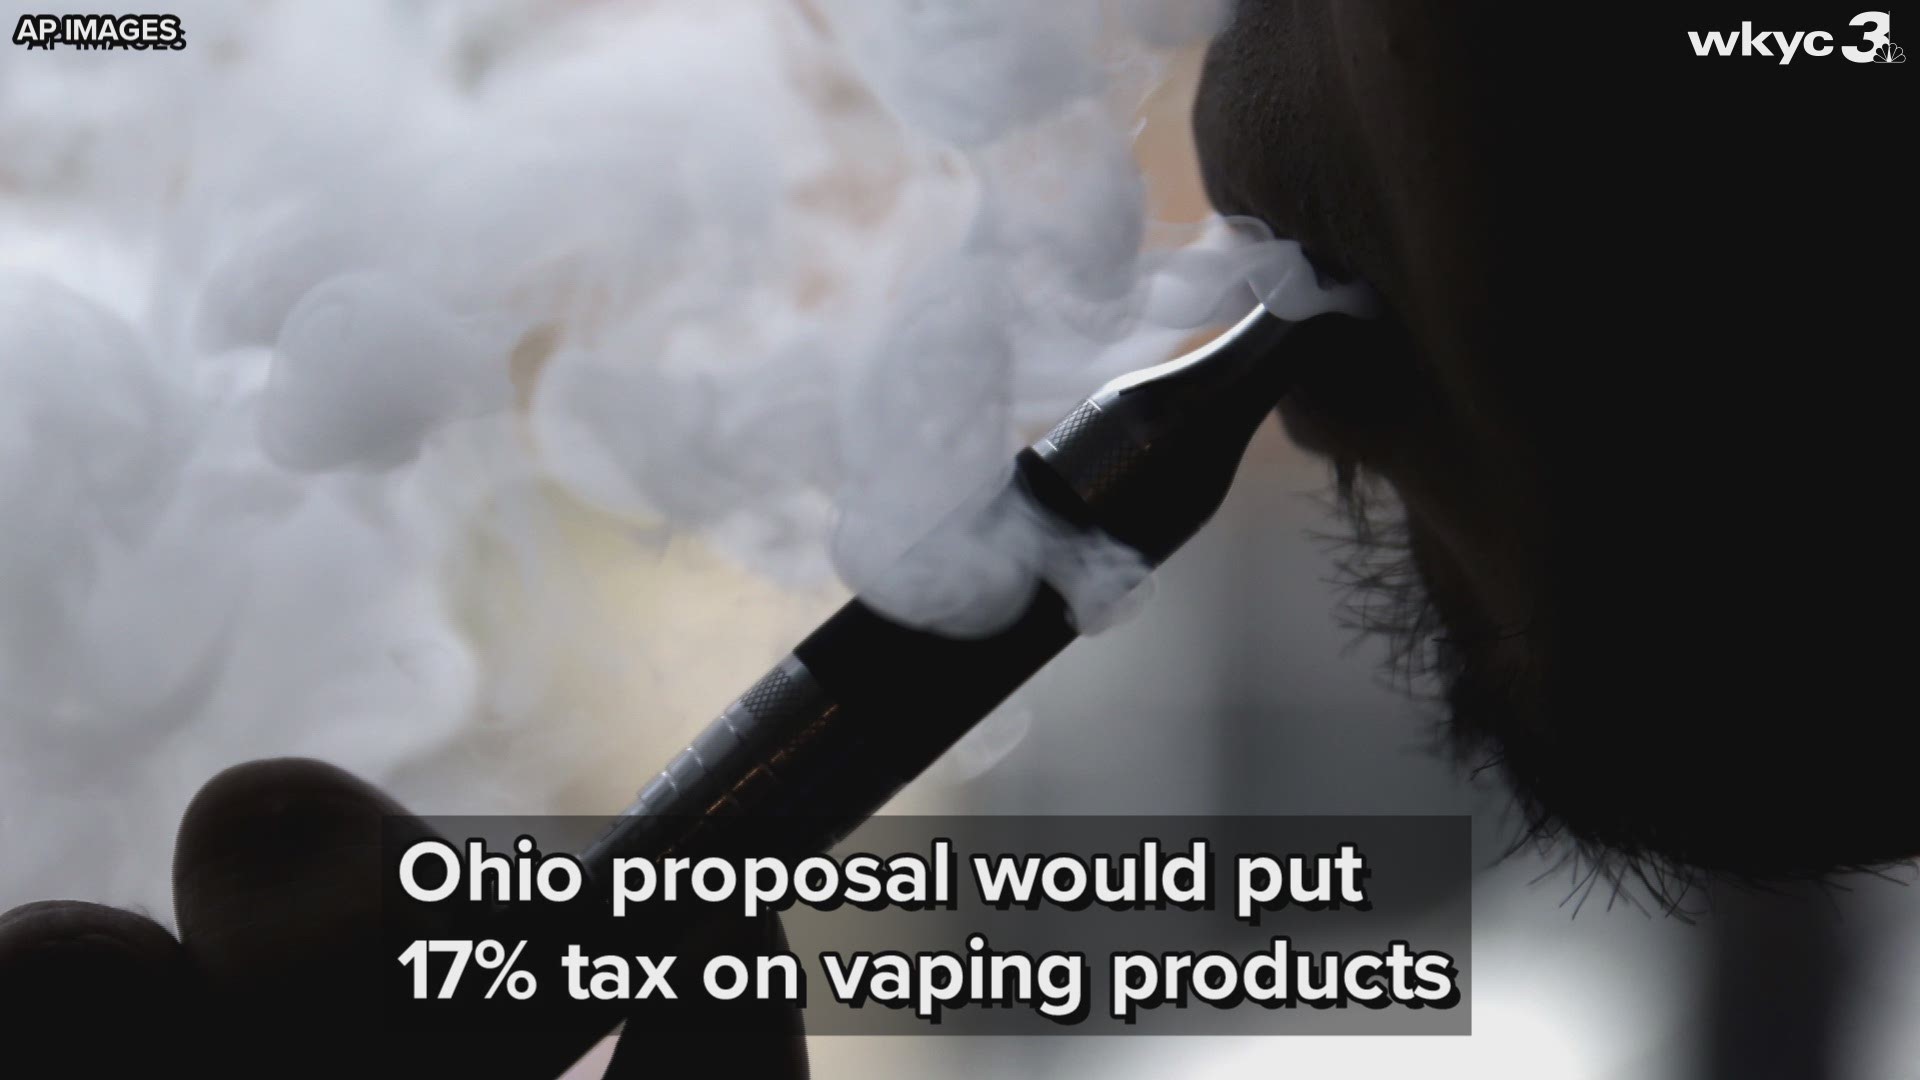 Senate Finance Chairman Matt Dolan, a Republican from Chagrin Falls, says he's concerned that vaping has filled a niche in Ohio that is attracting teens.